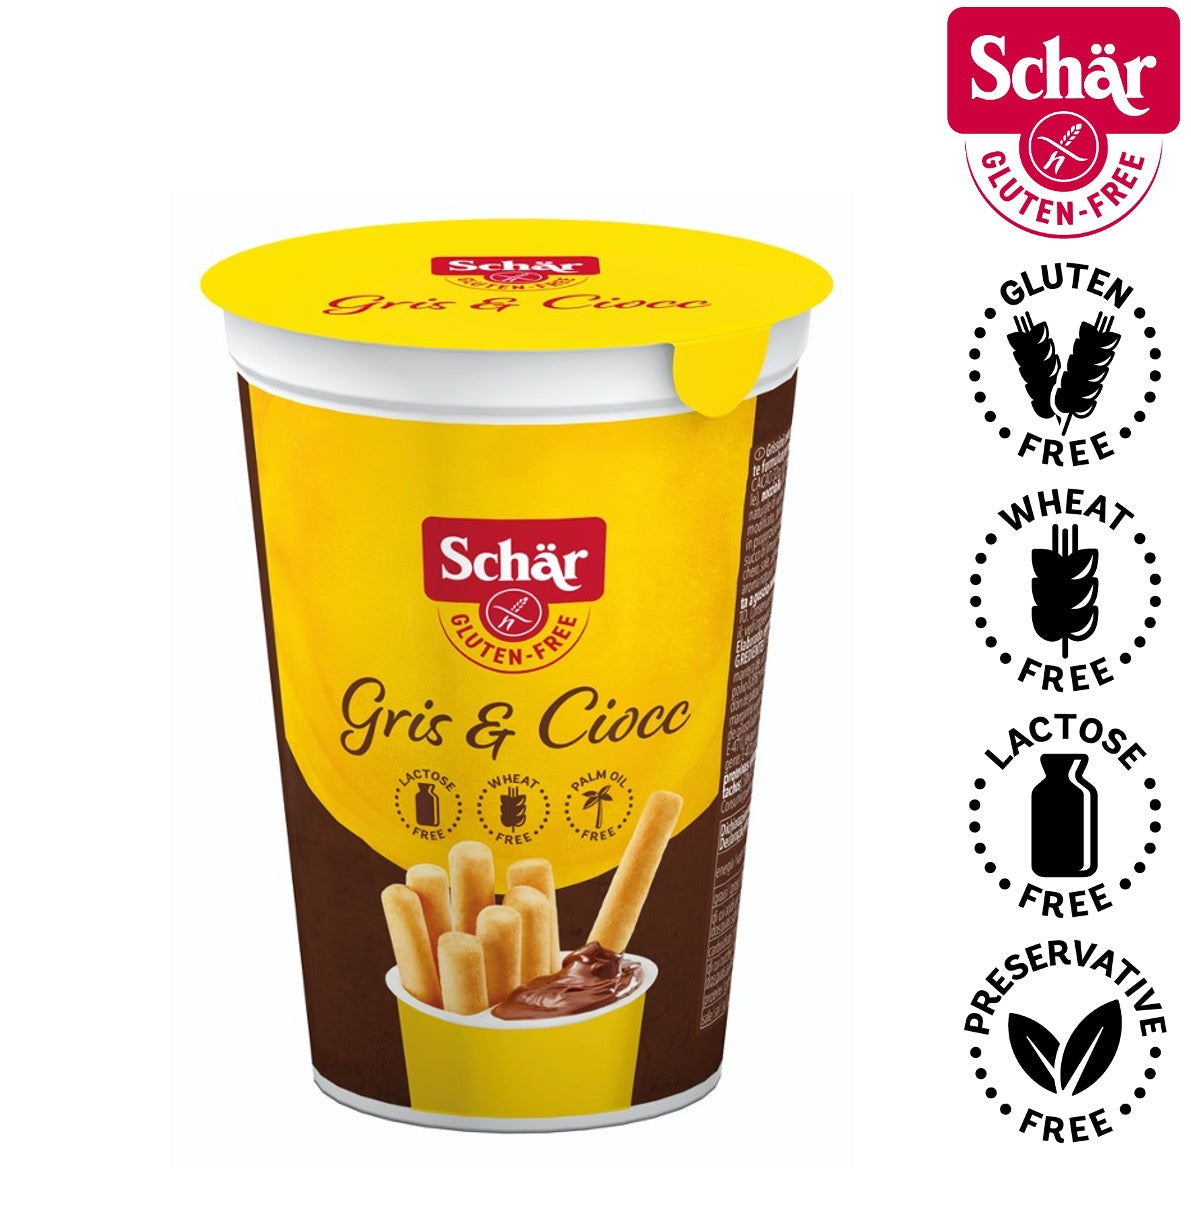 Schar Milly Gris & Ciocc, Italian Breadsticks with a Cocoa Dipping Sauce, Gluten Free - 52gr